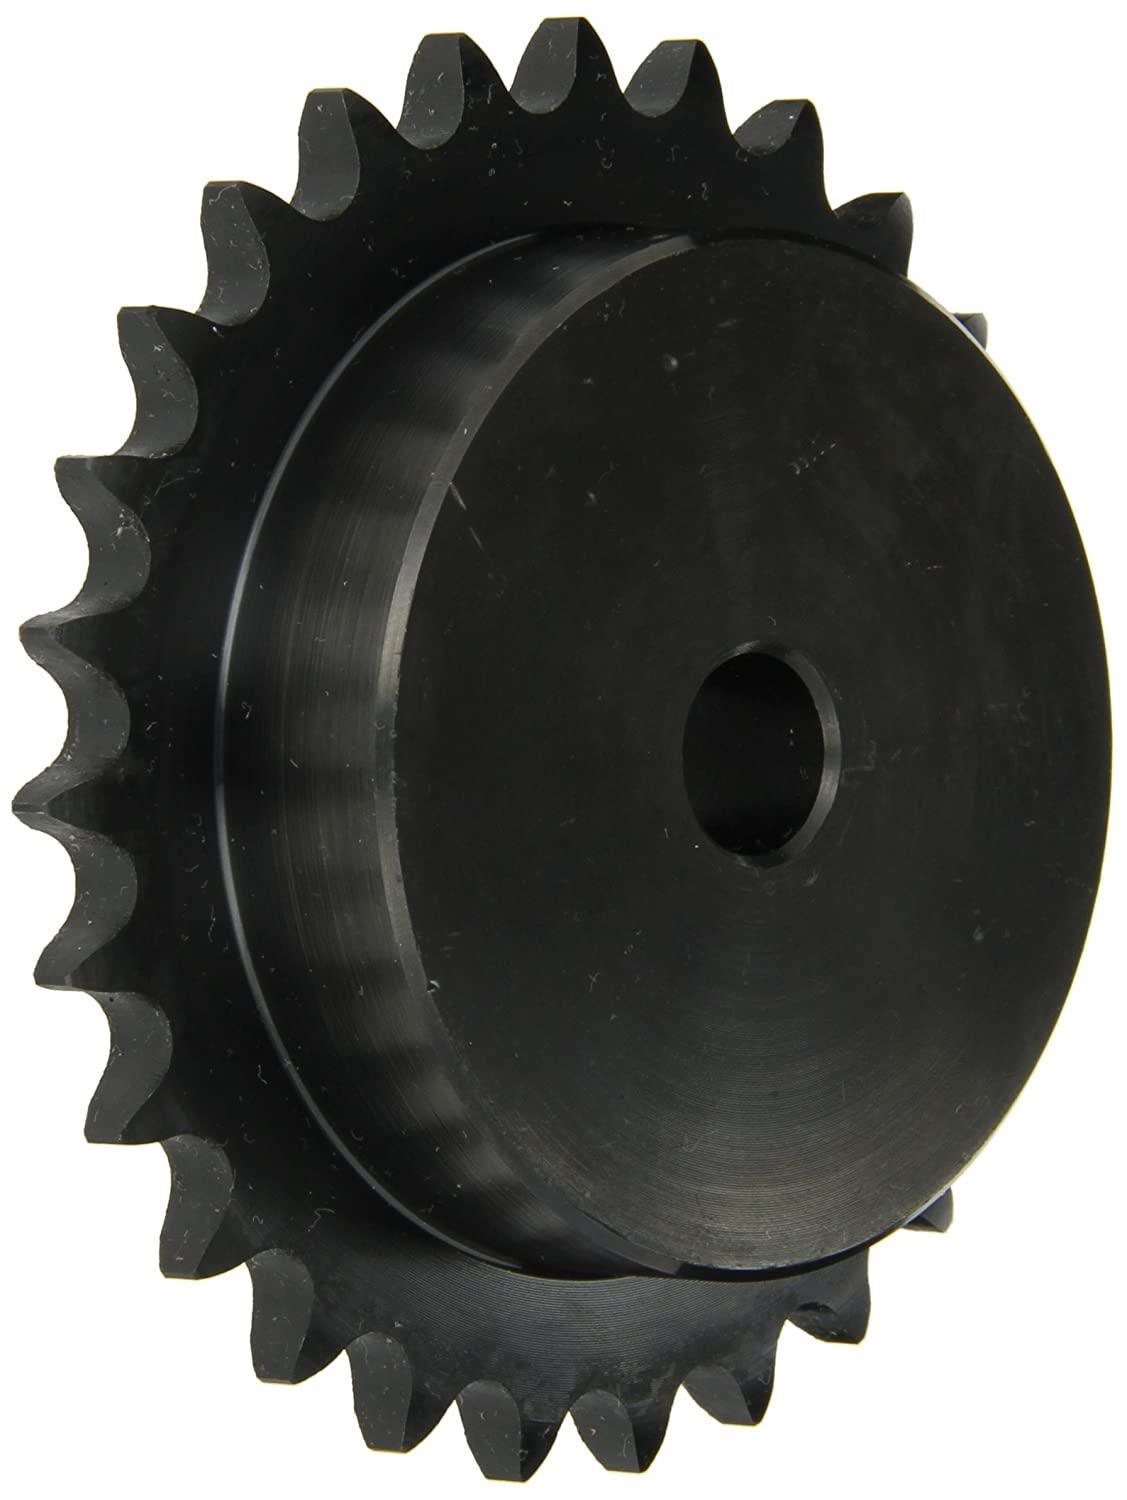 100B42 Roller Chain Sprocket With Stock Bore - Forces Inc